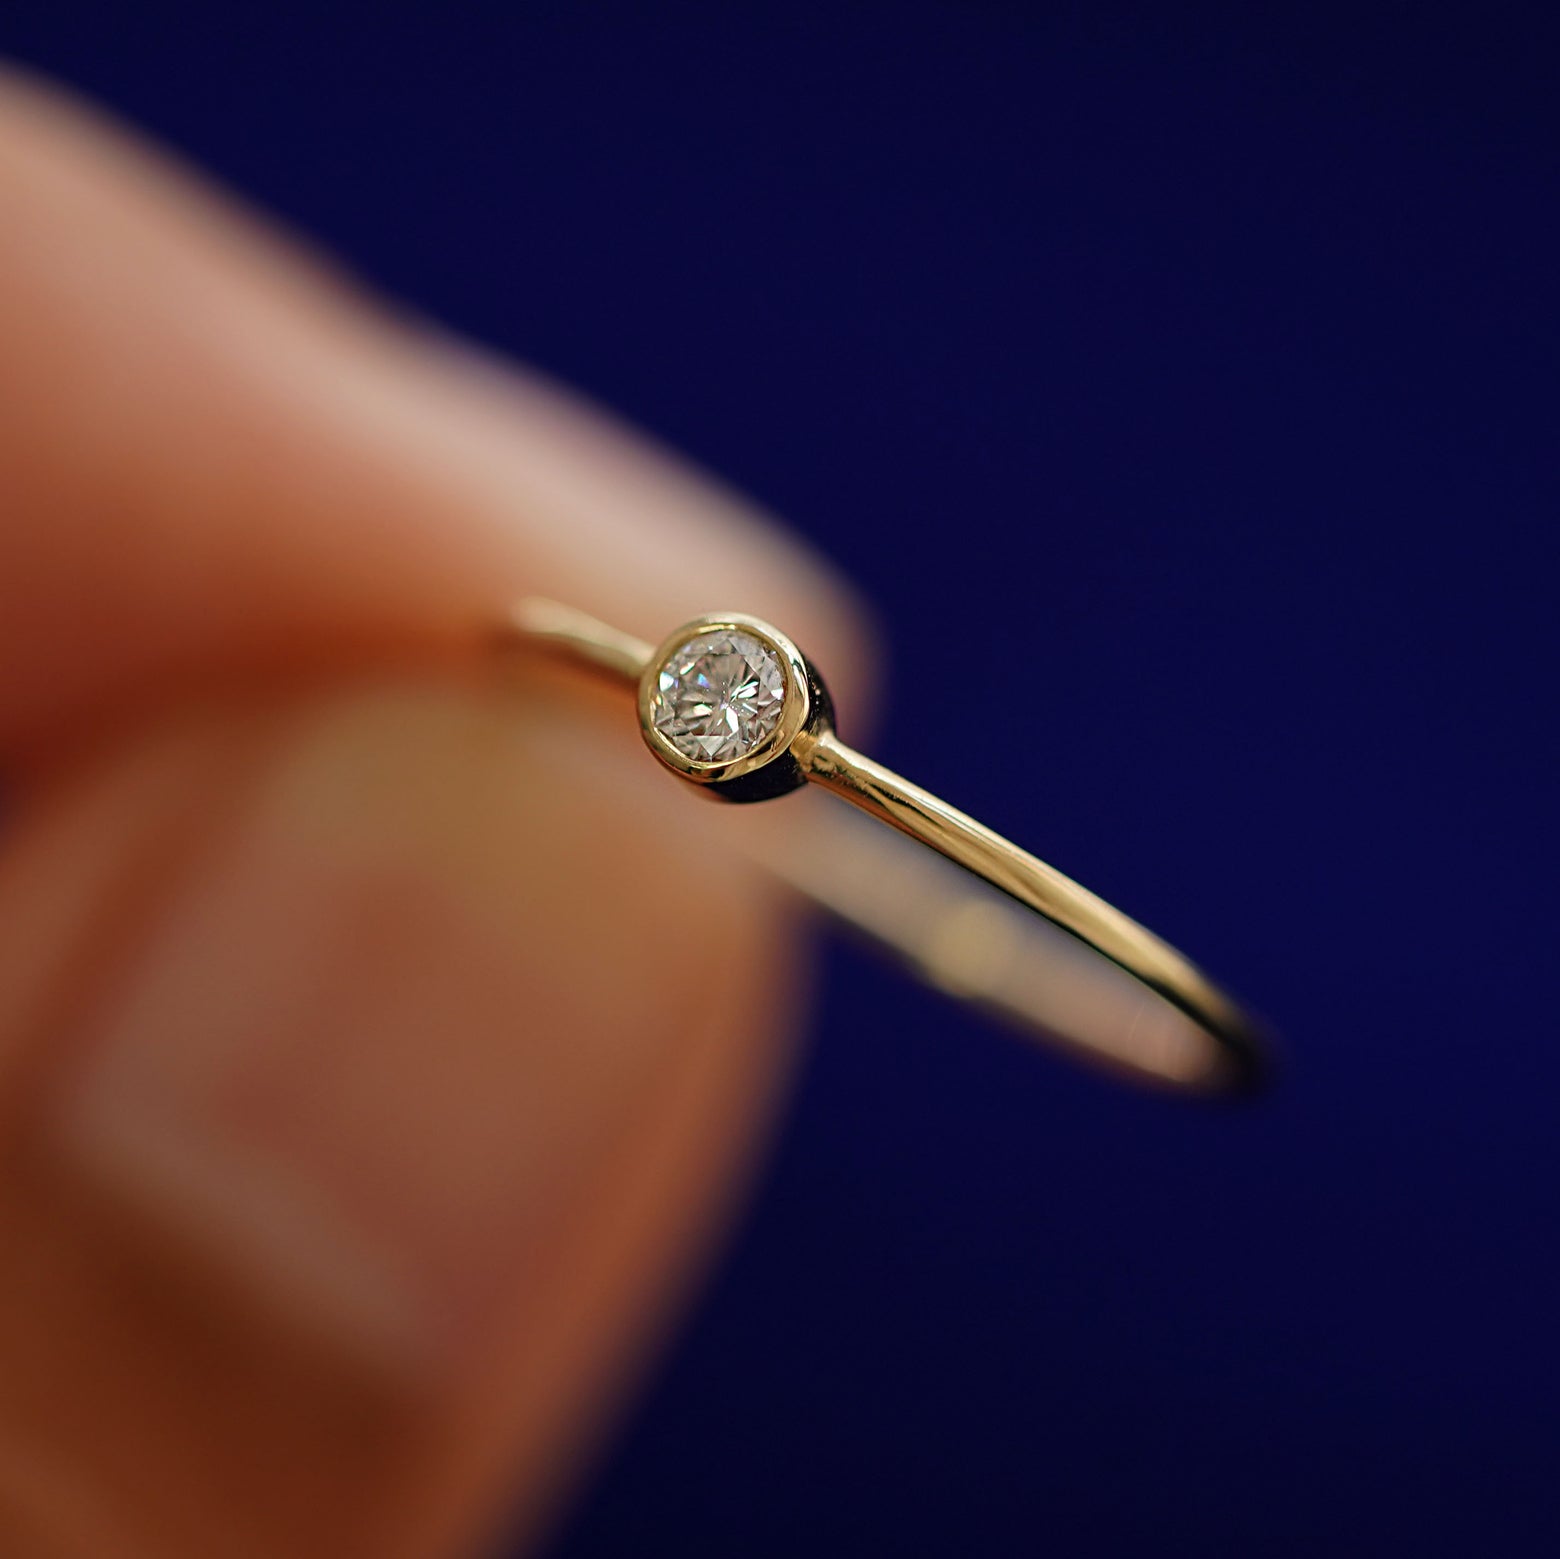 A model holding a Diamond Ring tilted to show the side of the ring